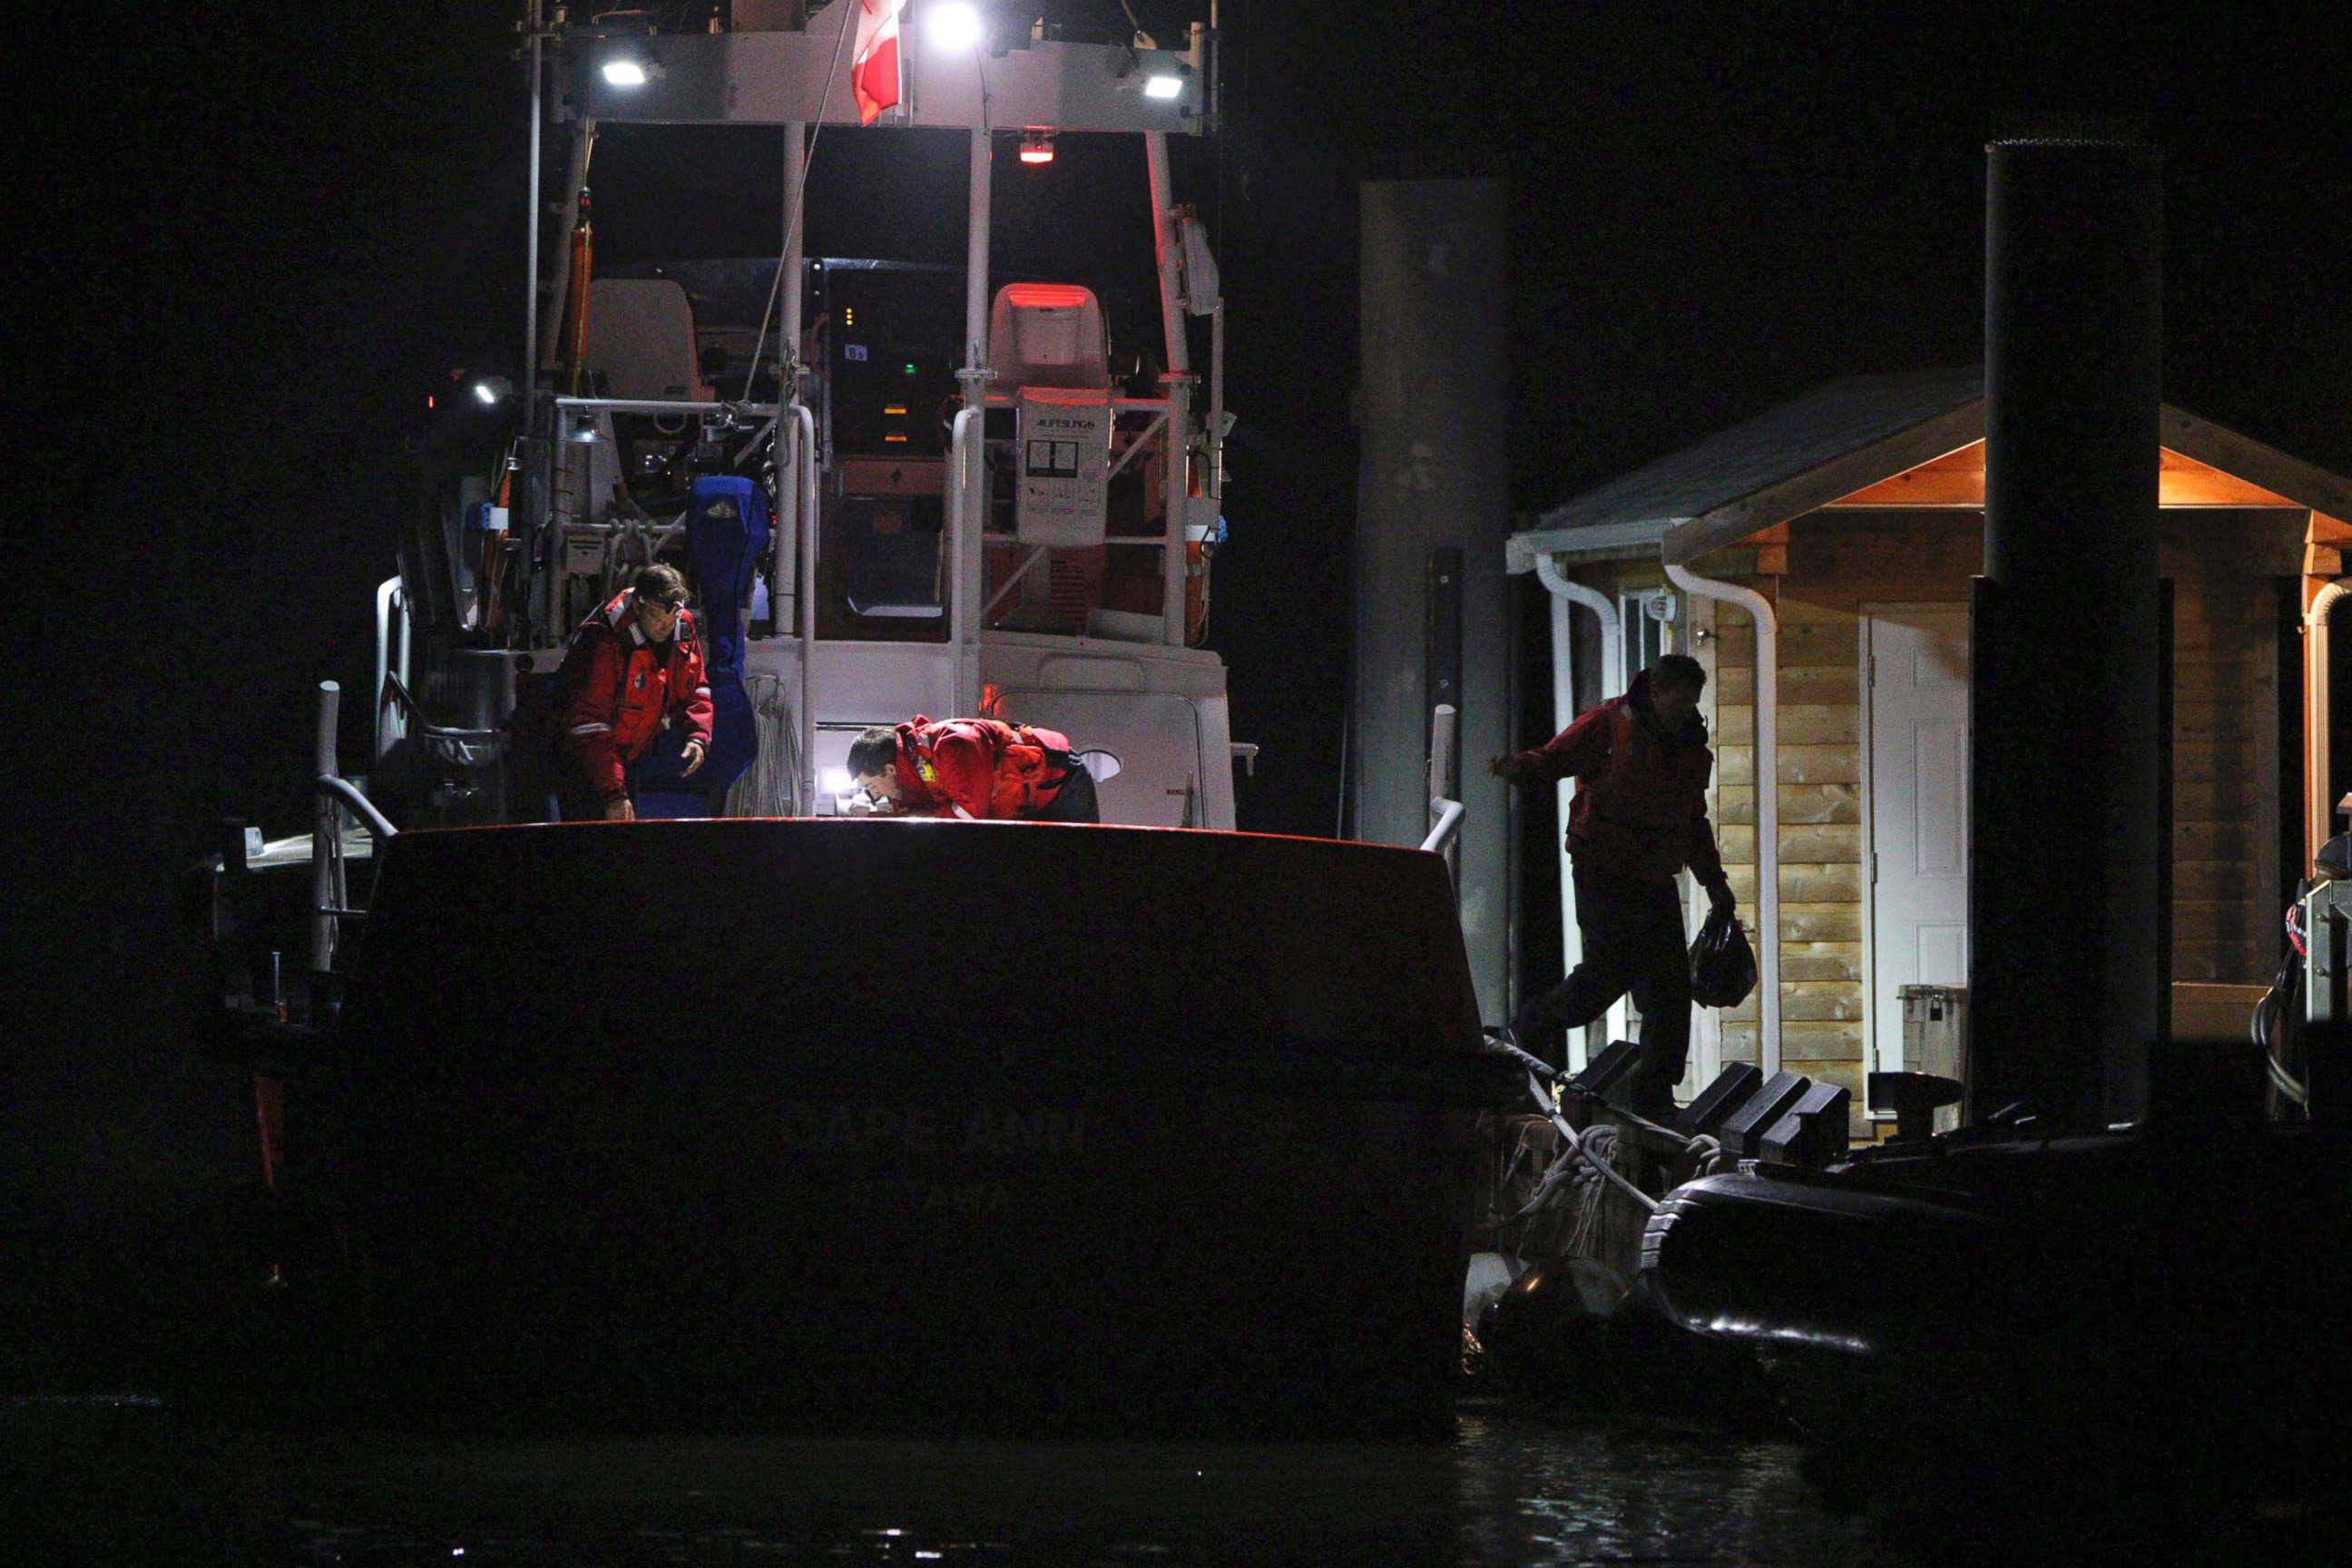 PHOTO: Canadian Coast Guard crew arrive at a dock in Tofino, west coast of Vancouver, Canada, early on Oct. 26, 2015, following a search and rescue operation.